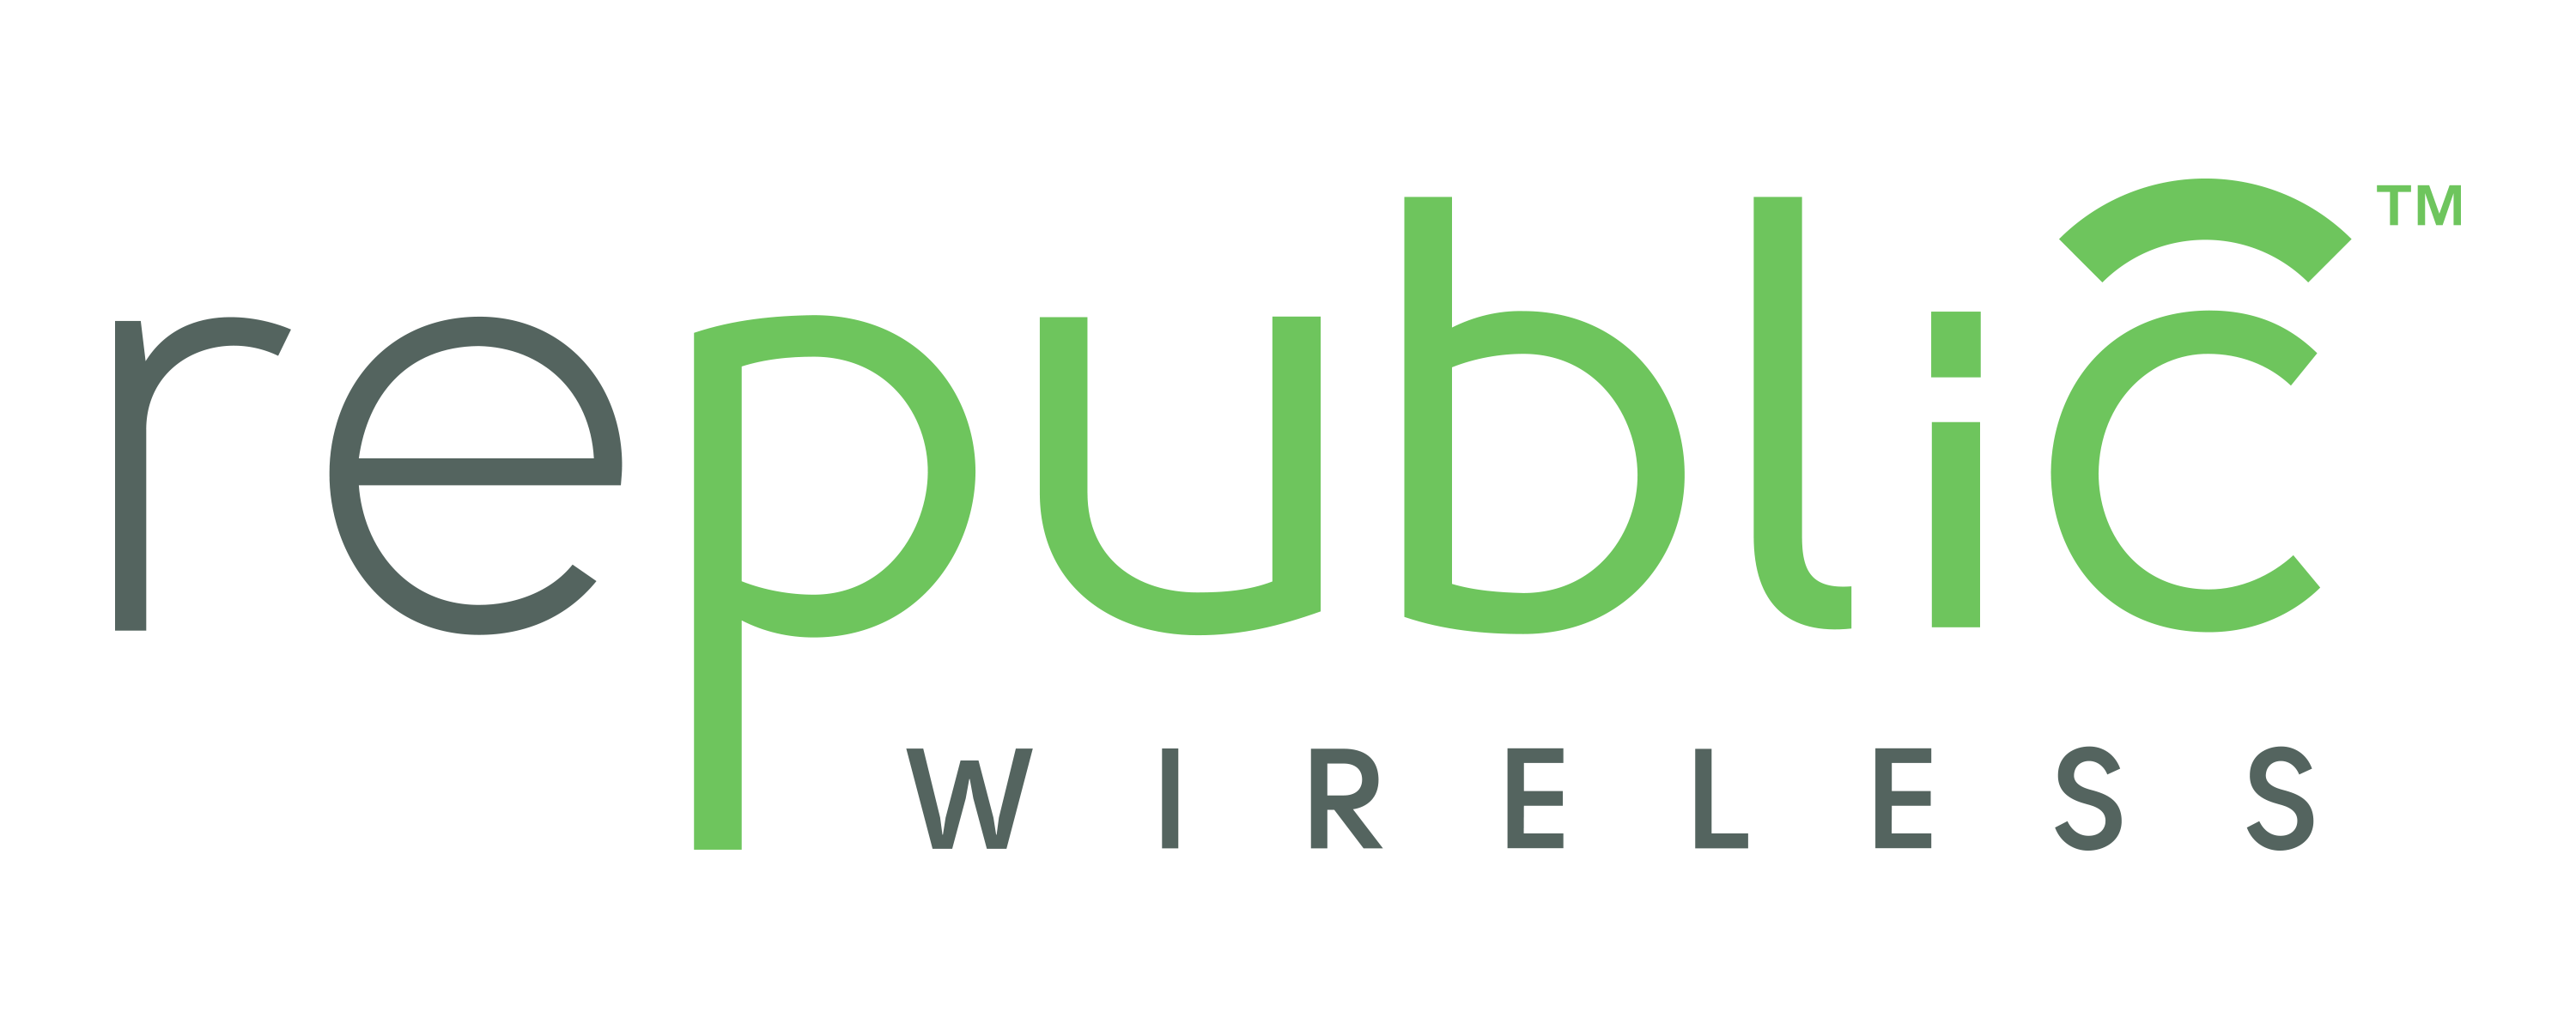 WiFi smartphone - Republic Wireless refunds customers for all unused cell data so you never pay for more cell data than you use or need.